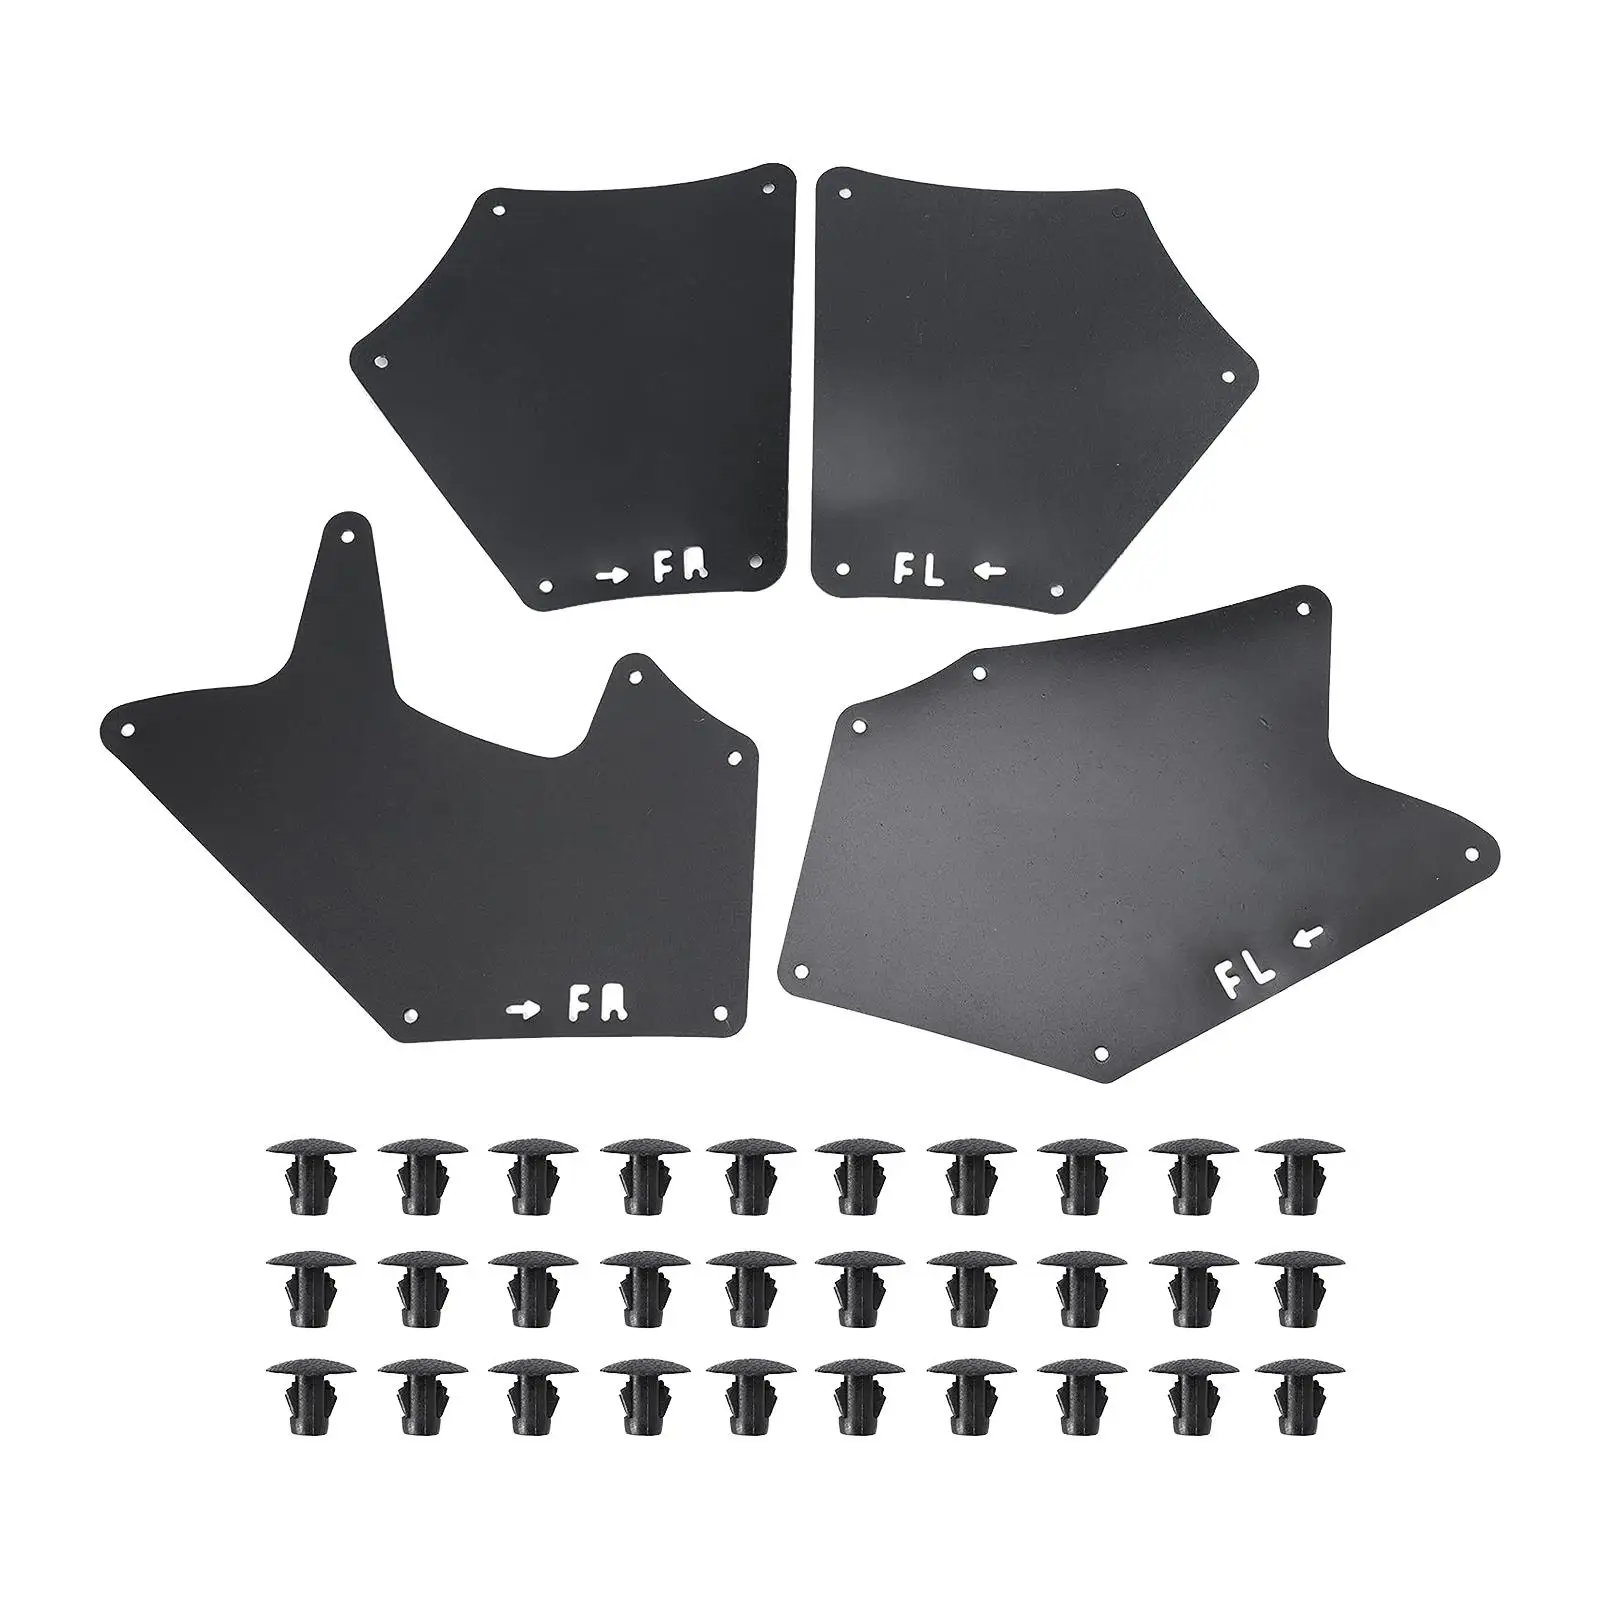 4x Mud Flaps Fender Liner Replacement Mudflaps 53737-0C030 for Toyota for tundra 2008-2021 Professional High Reliability Sturdy